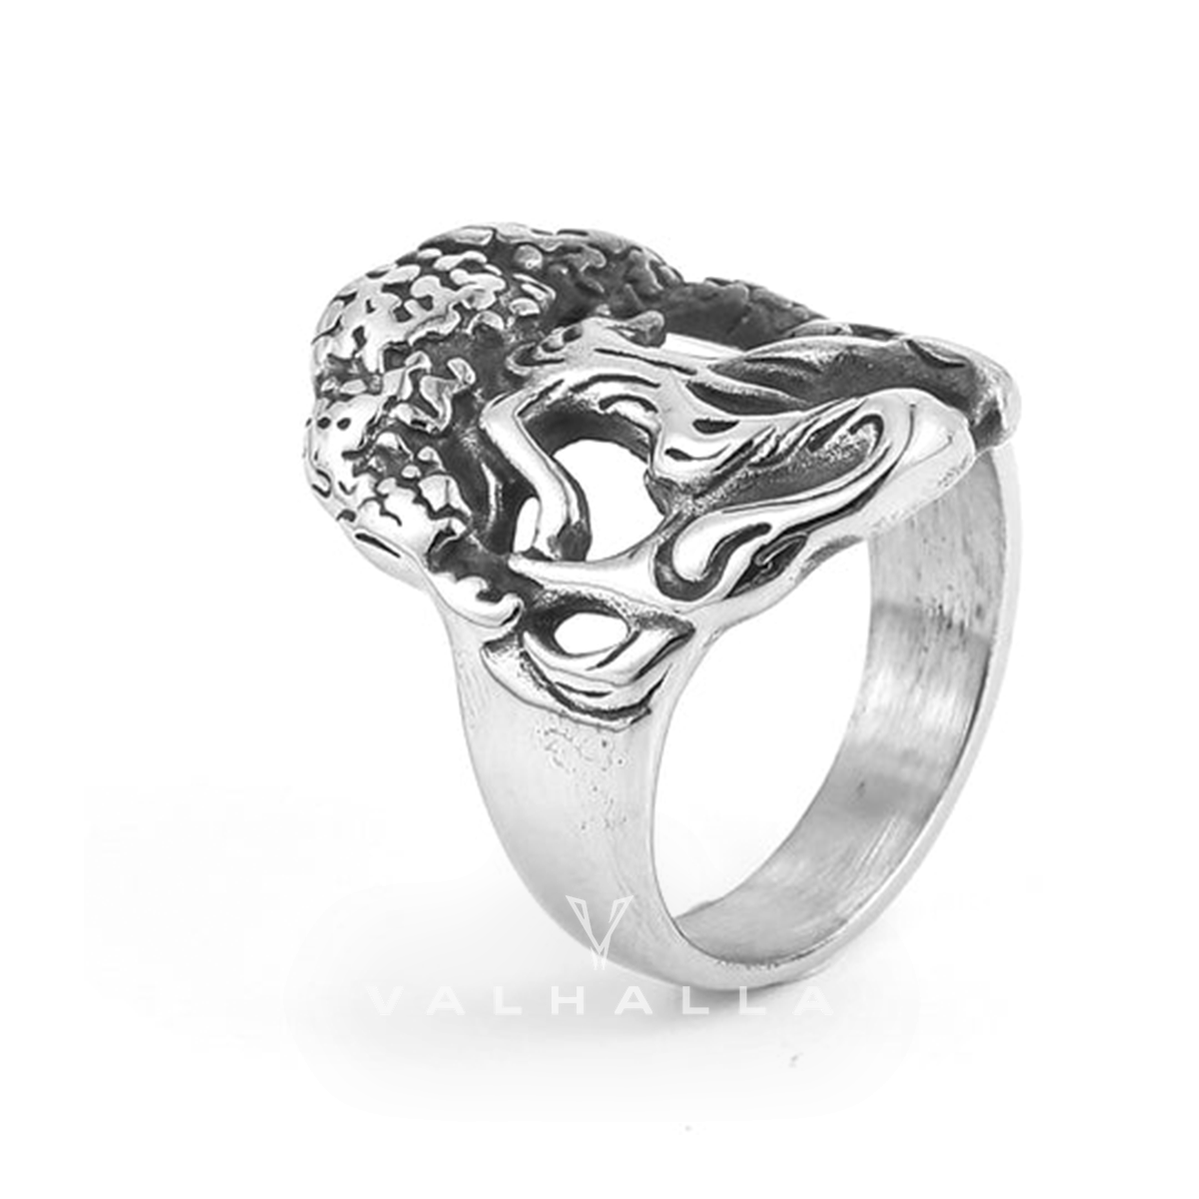 Handcrafted Stainless Steel Yggdrasil / Tree of Life Ring